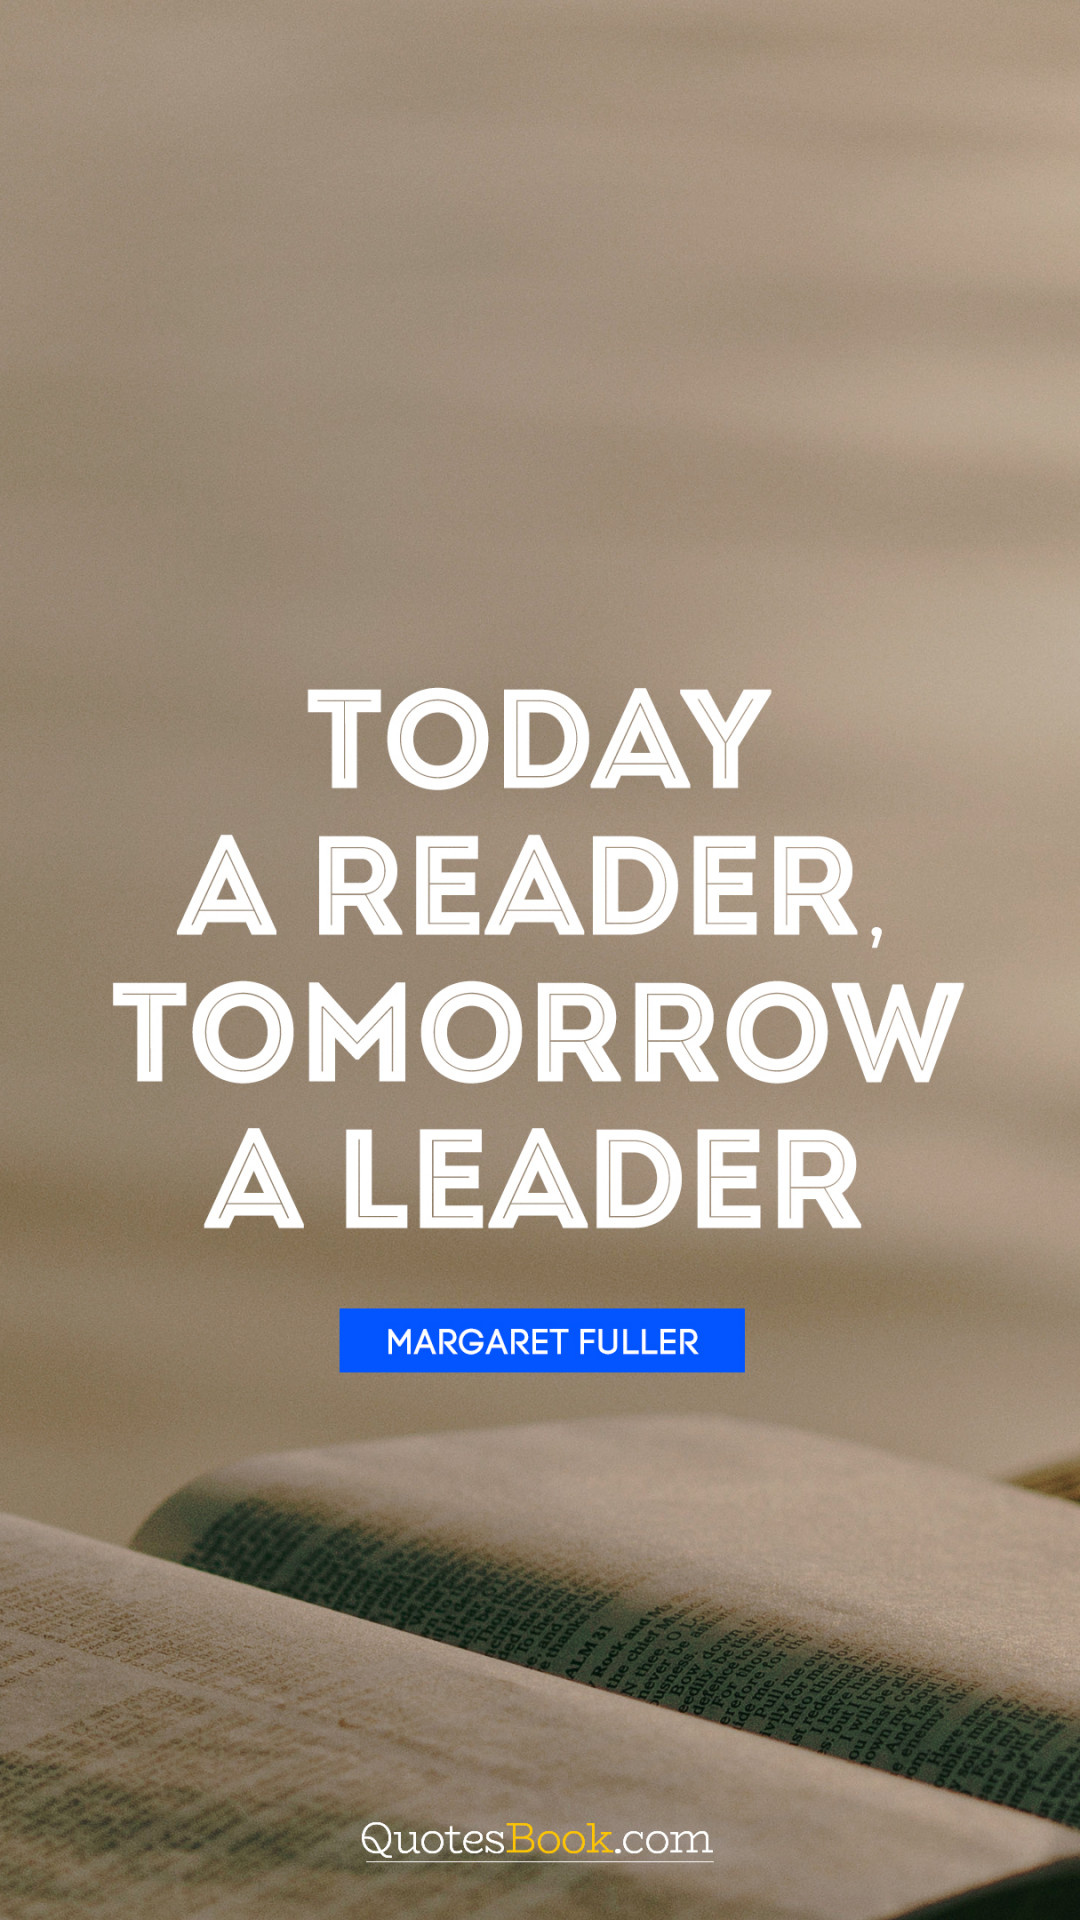 Today a reader, tomorrow a leader. - Quote by Margaret Fuller - QuotesBook